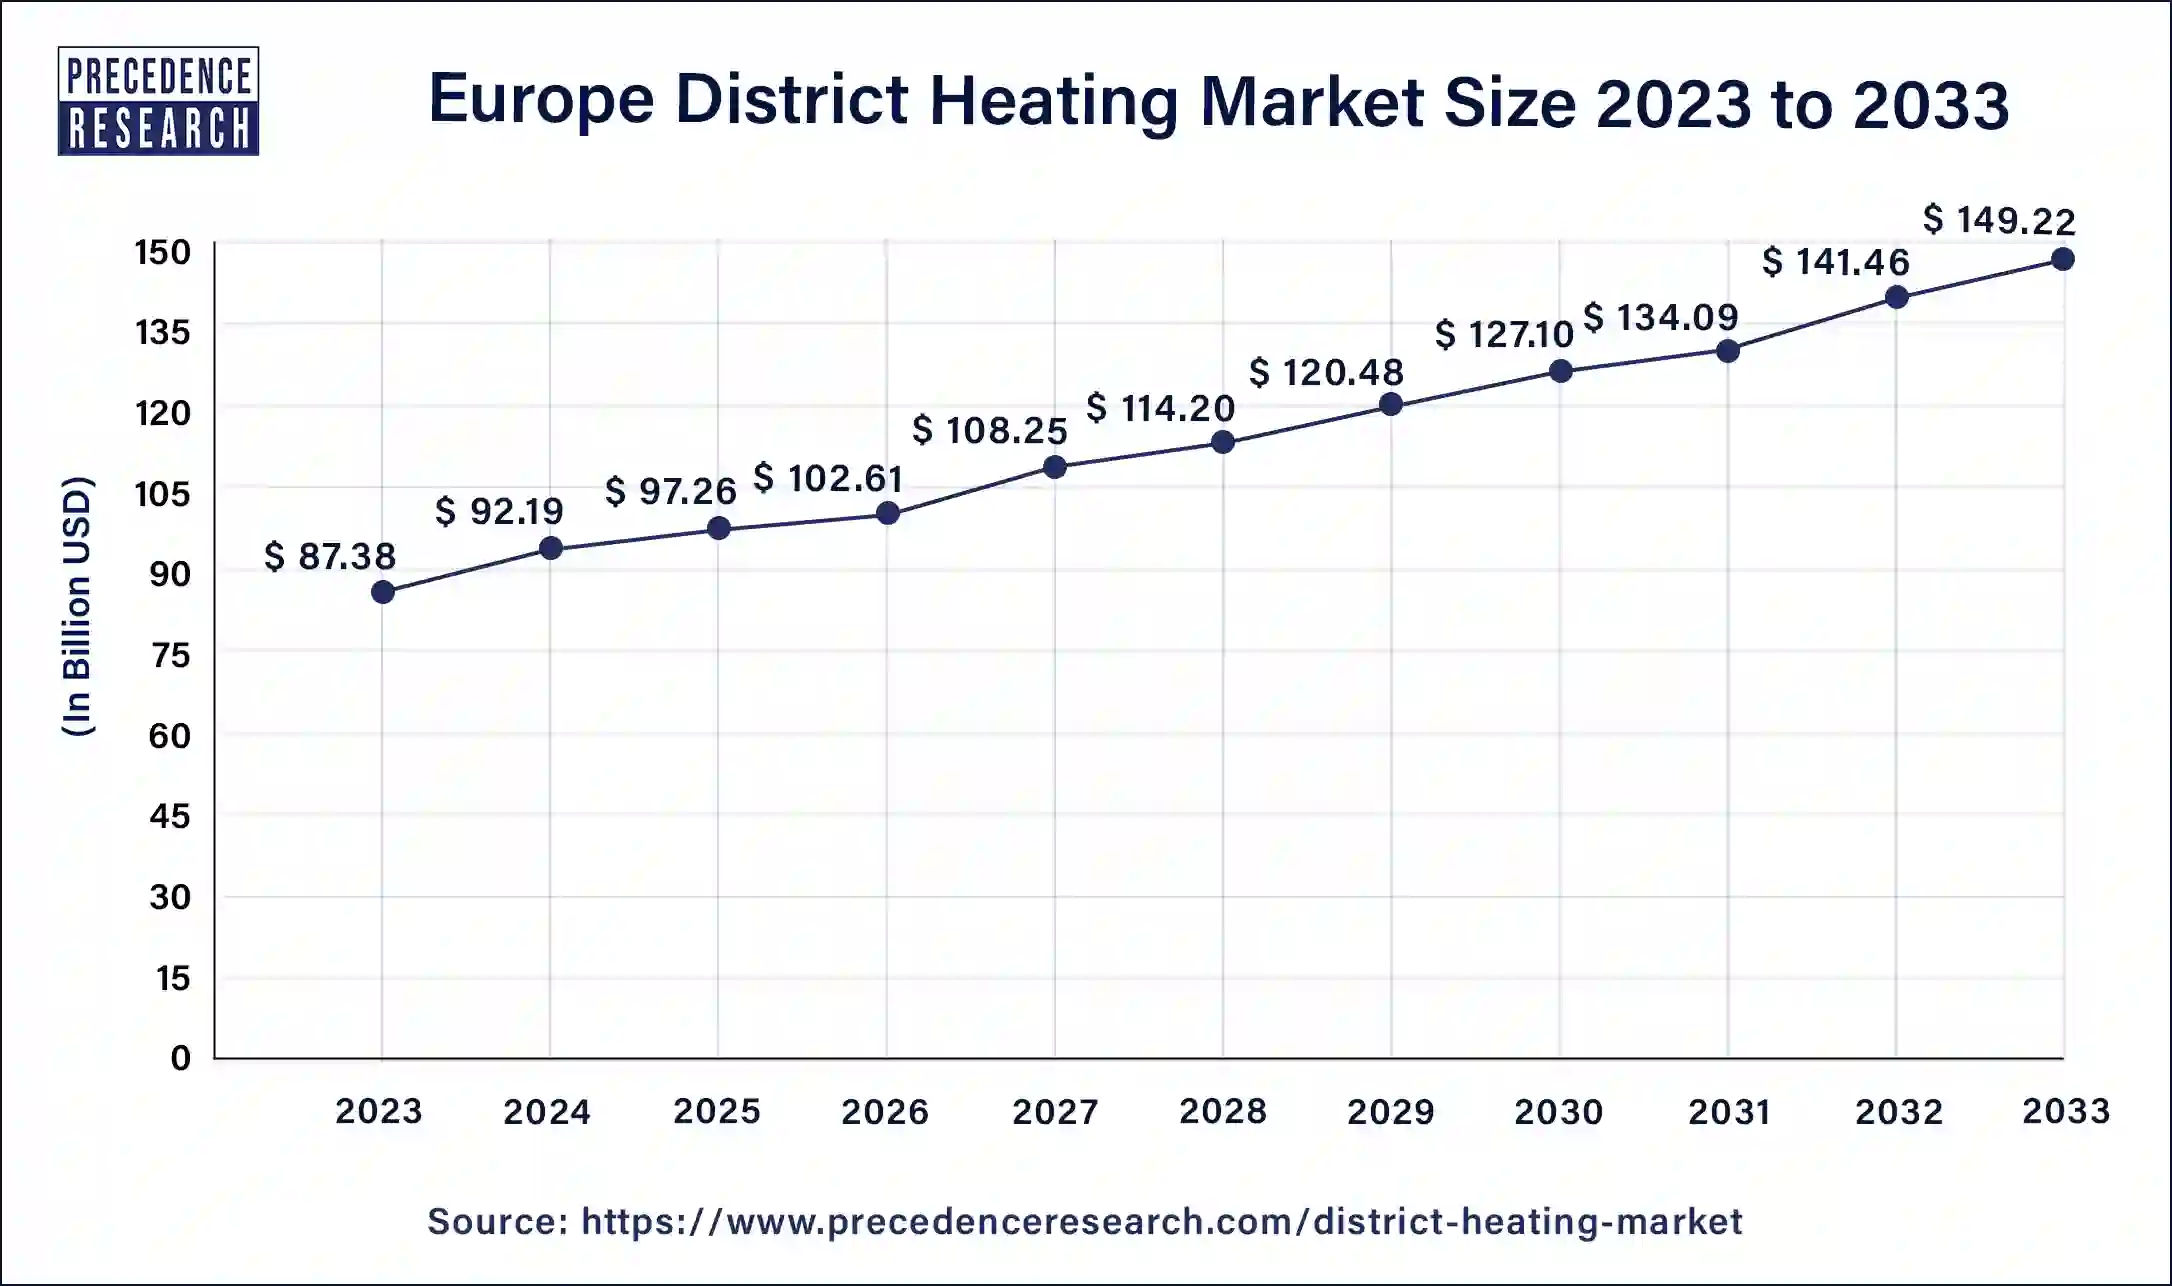 Europe District Heating Market Size 2024 to 2033